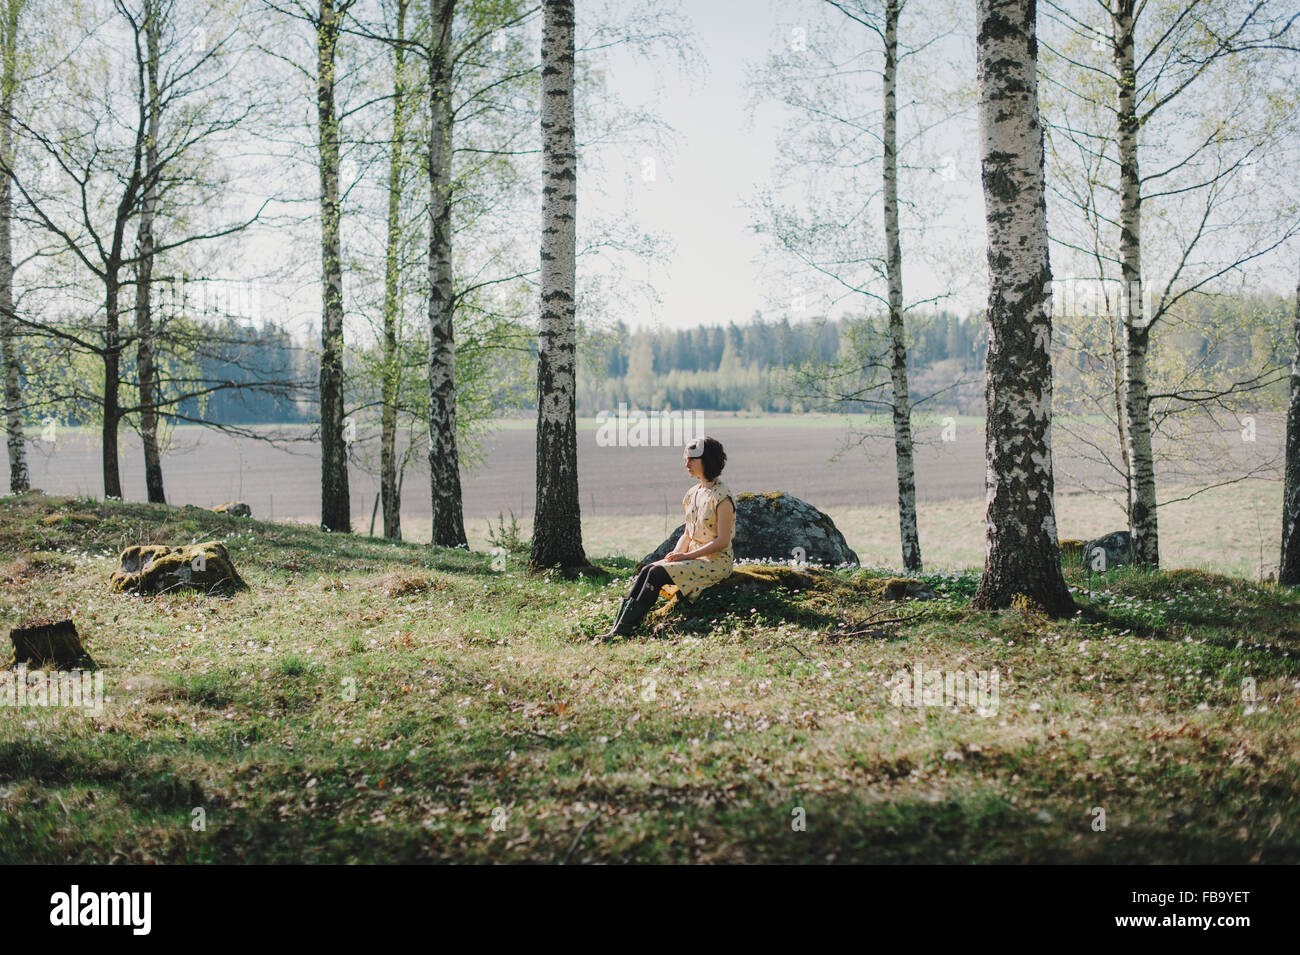 Sweden, Sodermanland, Vingaker, Attersta, Young woman sitting on stump in forest Stock Photo